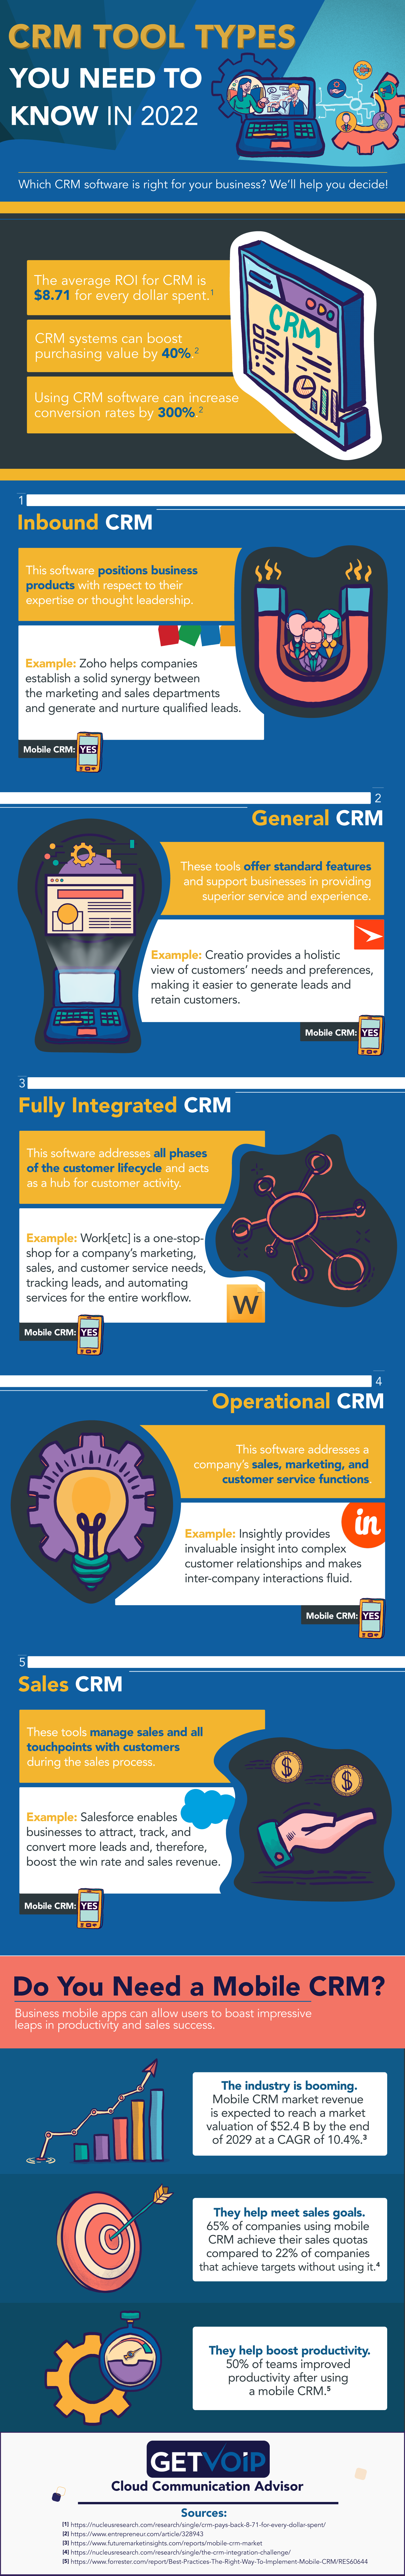 Infographic - CRM Tool Types You Need to Know in 2022